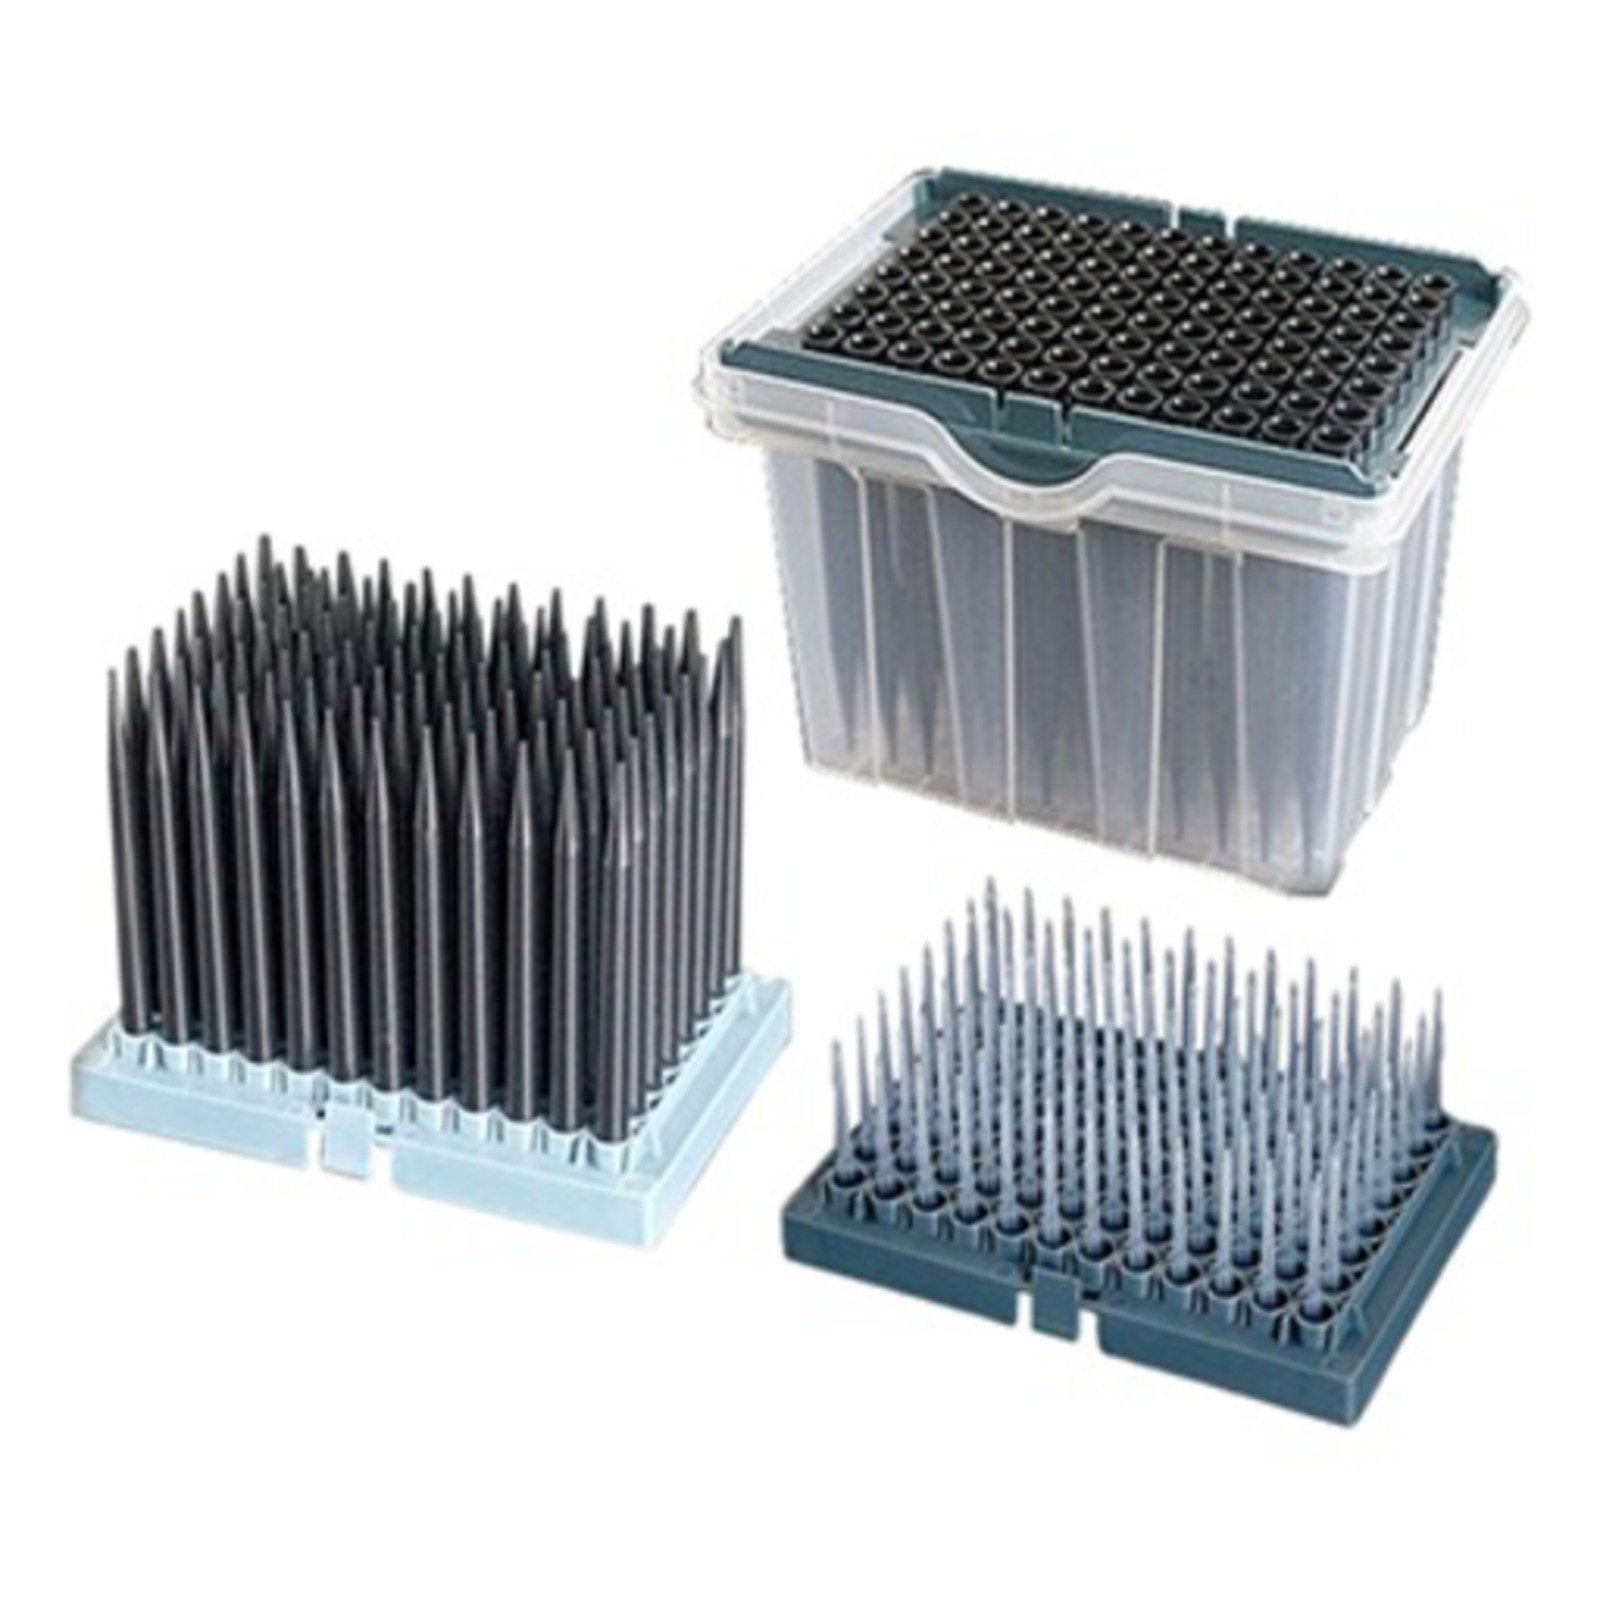 Robotic Sterile Filtered Pipette Tips; Tecan Type, 50uL, Conductive (Pack of 24 Racks x 96 Tips)